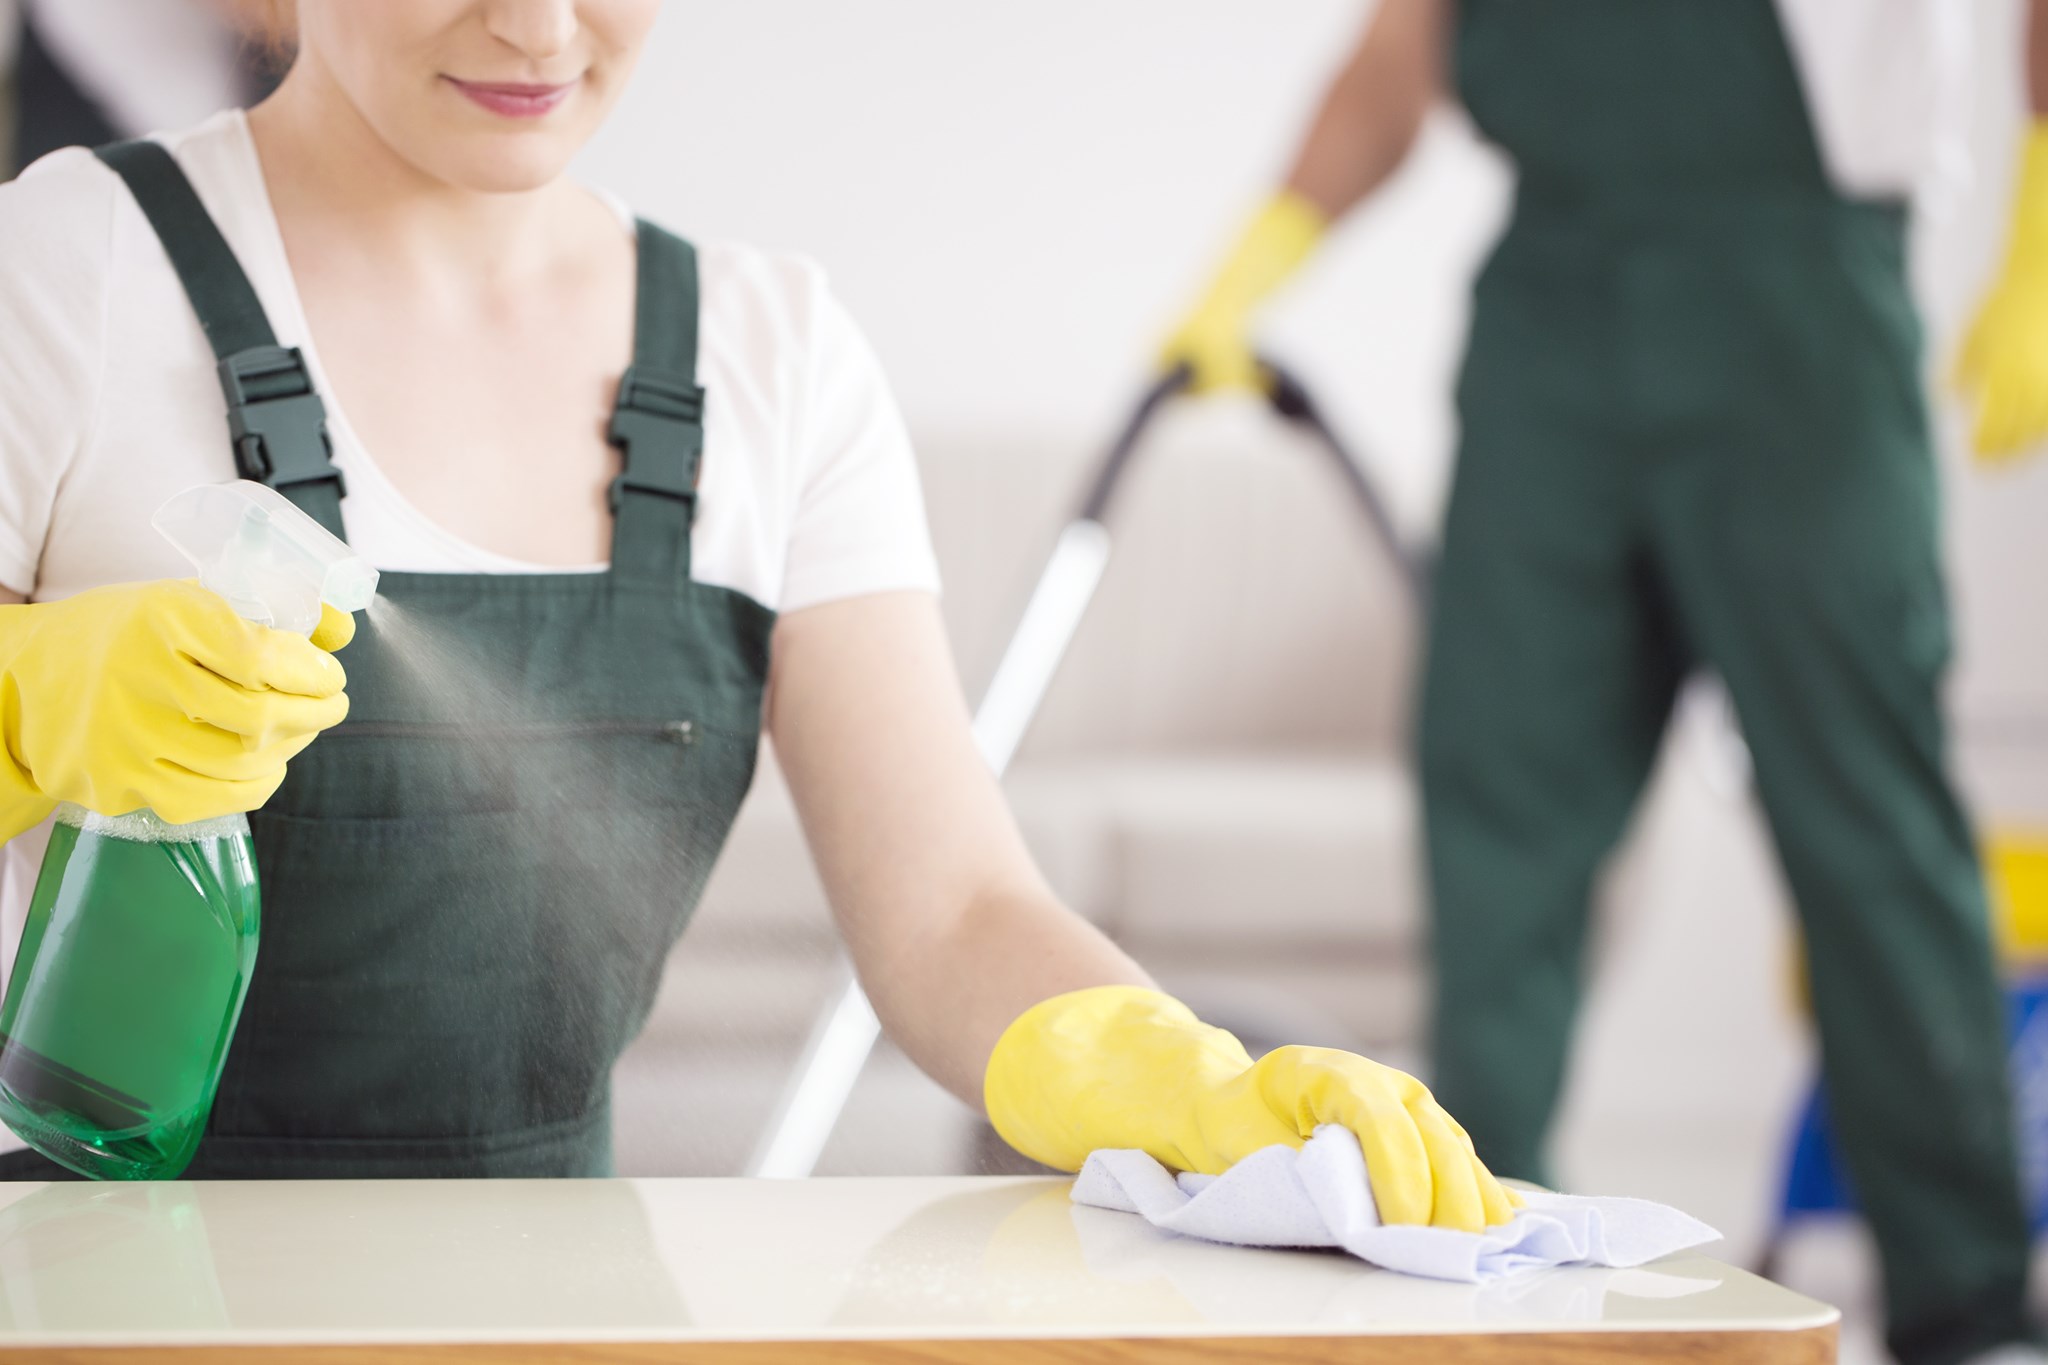 Riverside Cleaning Services